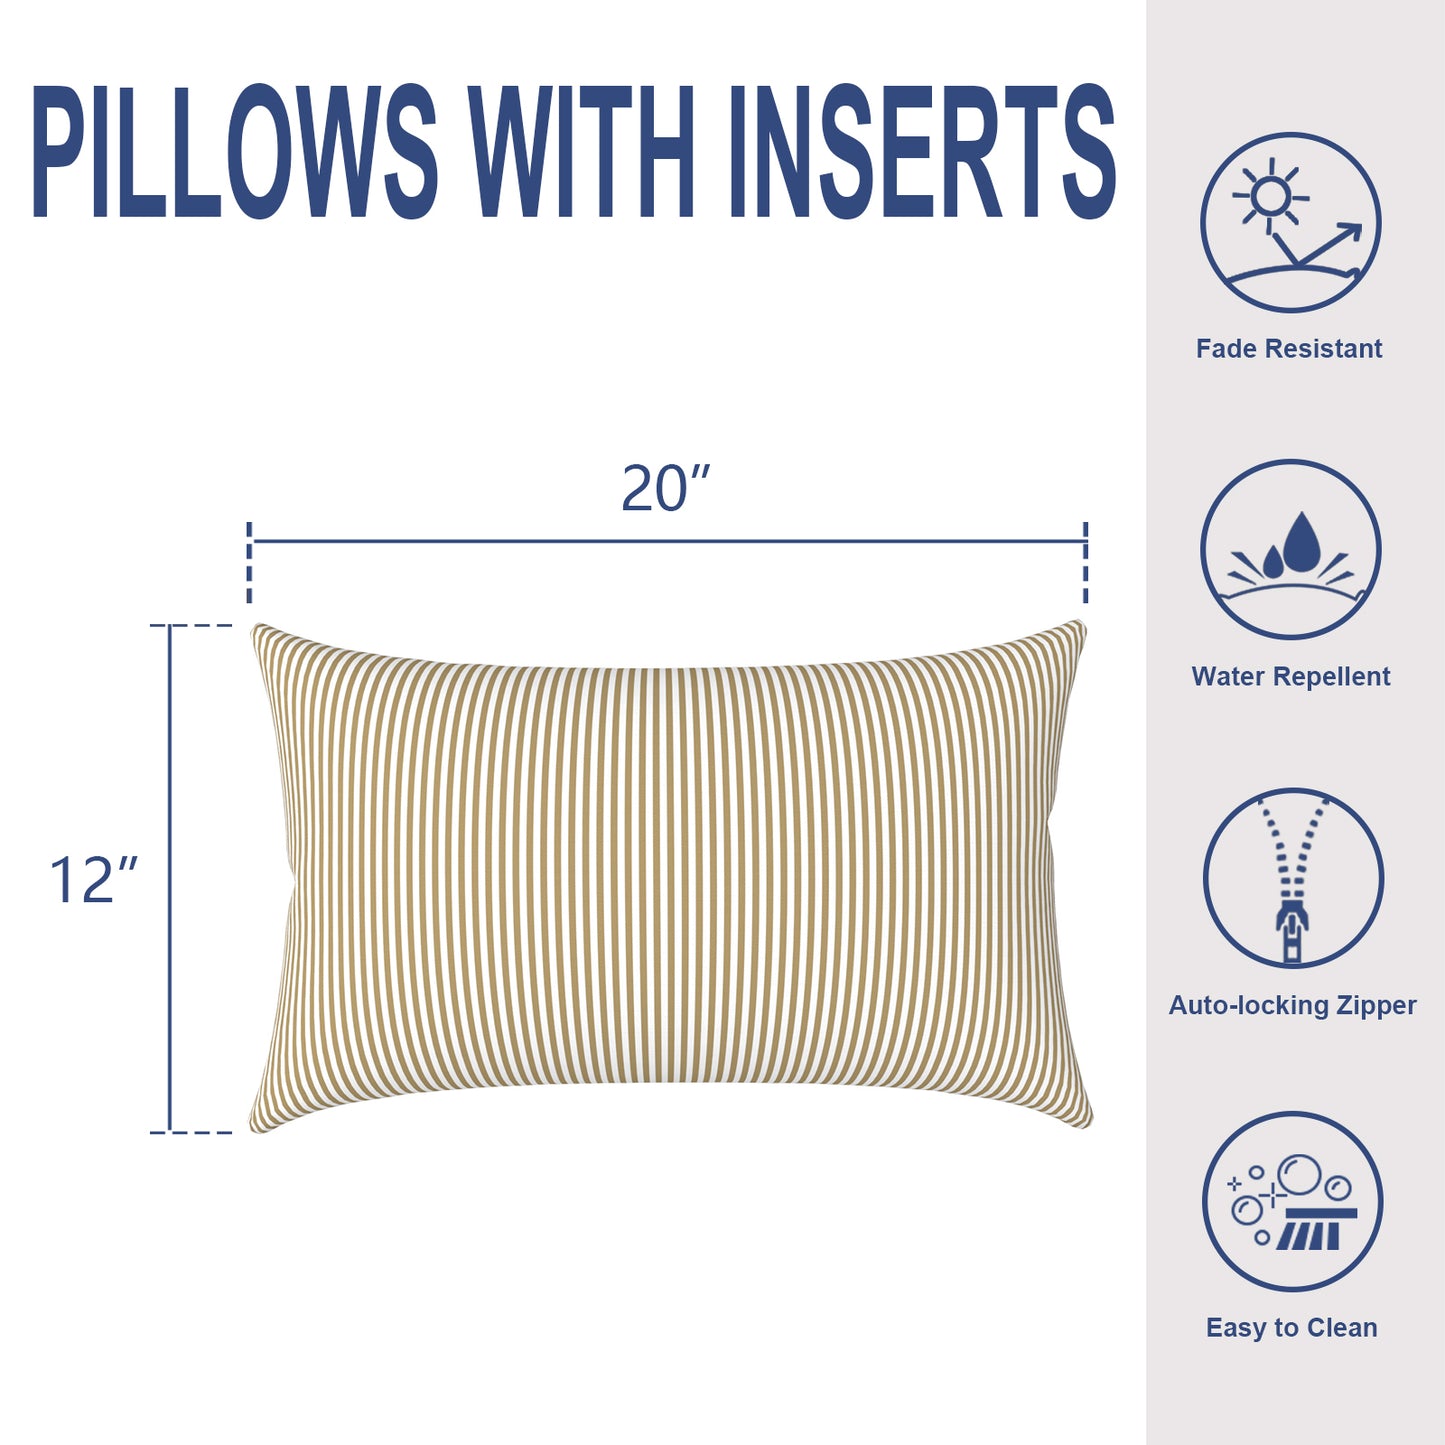 Melody Elephant Outdoor/Indoor Lumbar Pillows, Water Repellent Cushion Pillows, 12x20 Inch, Outdoor Pillows with Inserts for Home Garden, Pack of 2, Stripe Beige